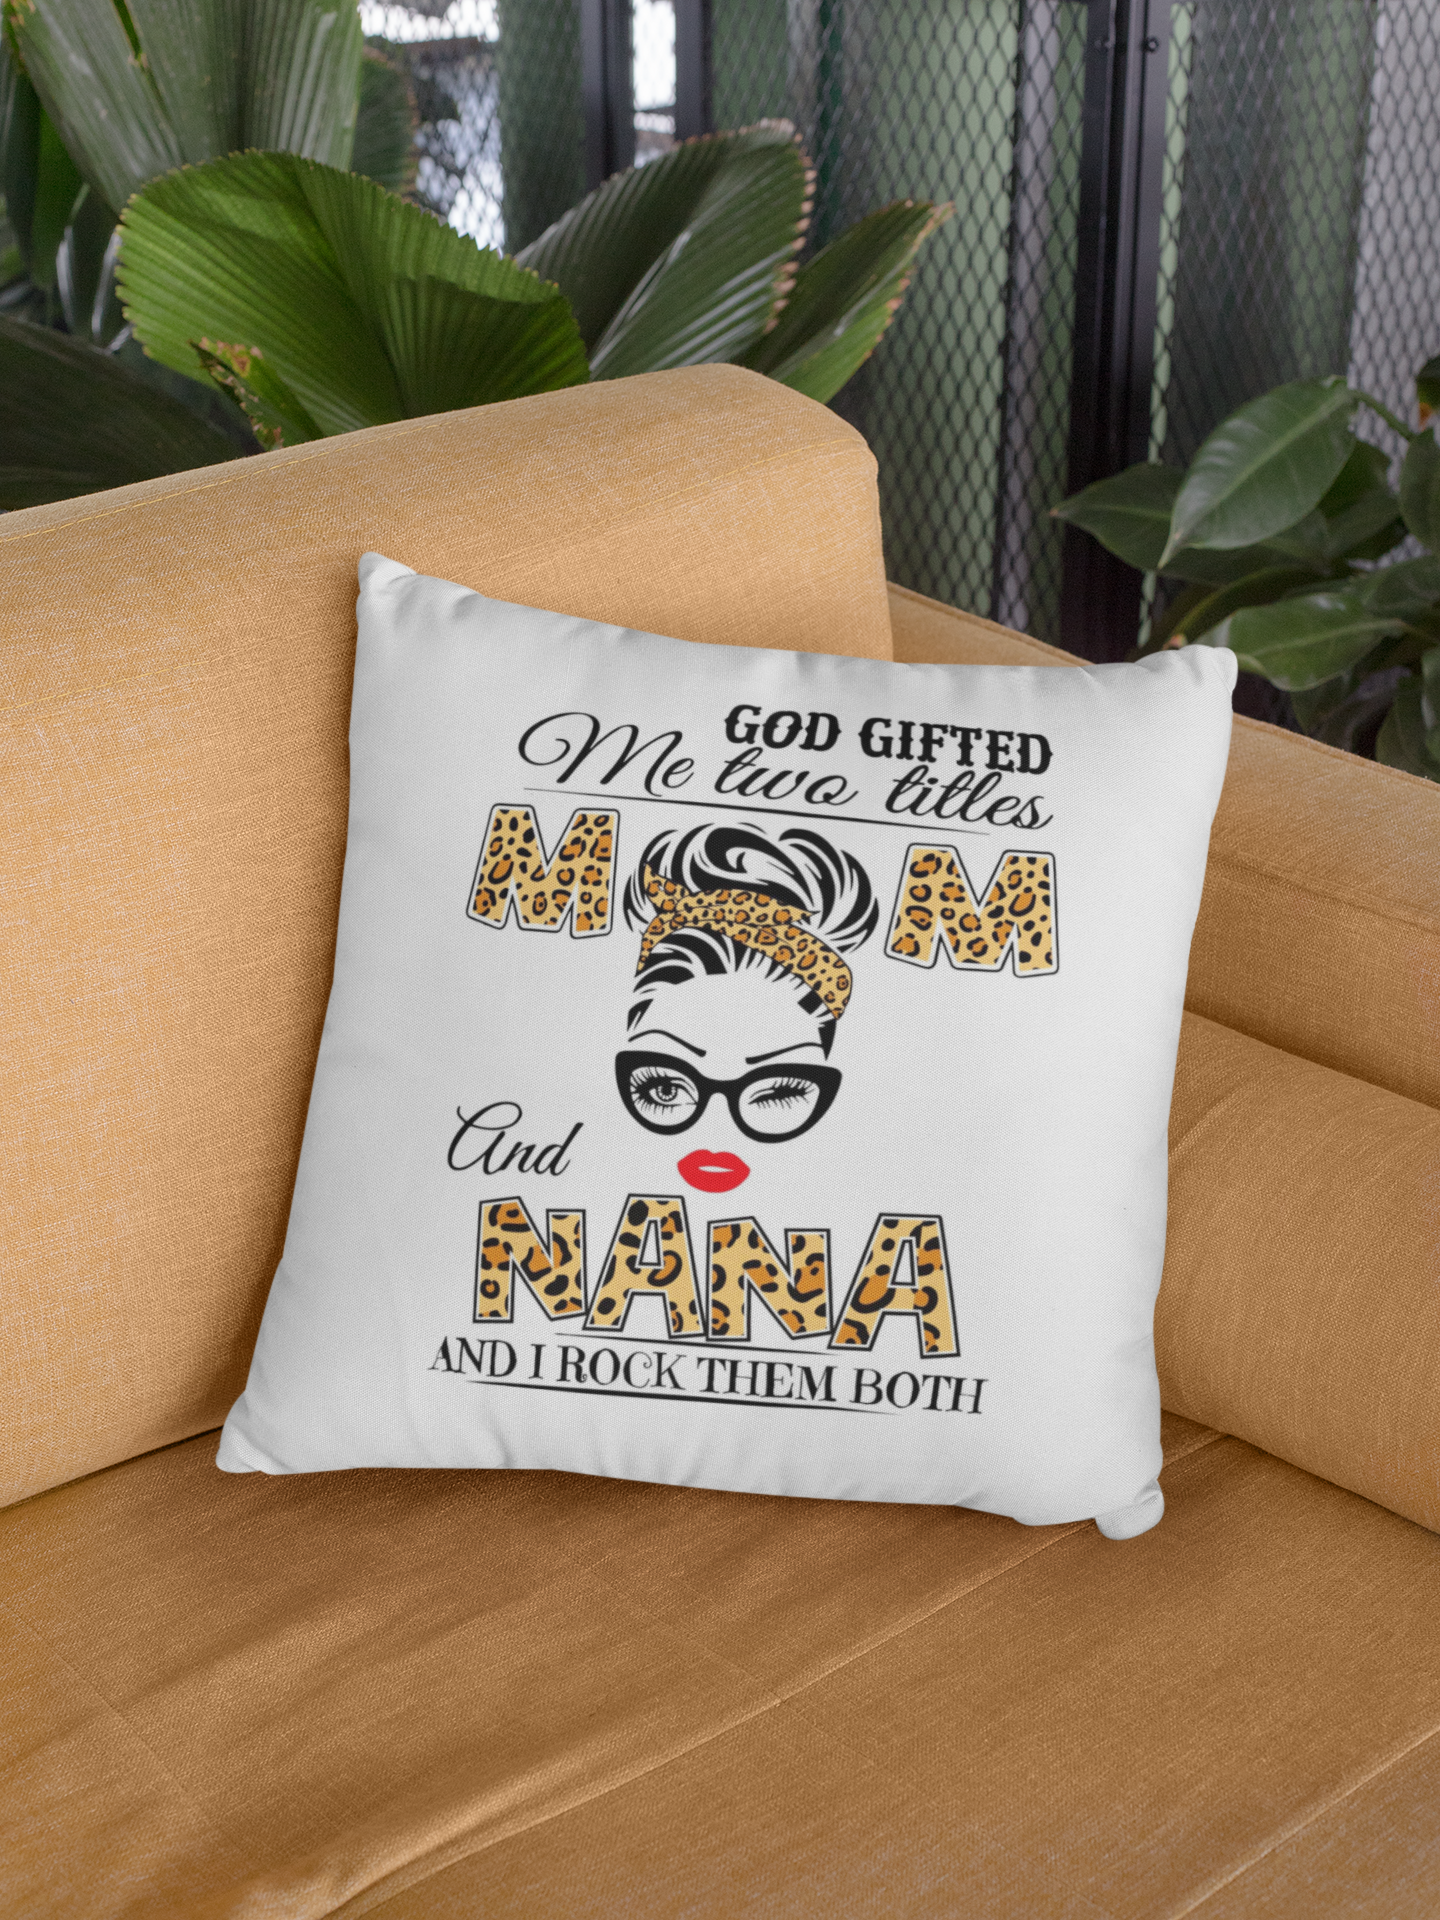 Gifted mom pillow